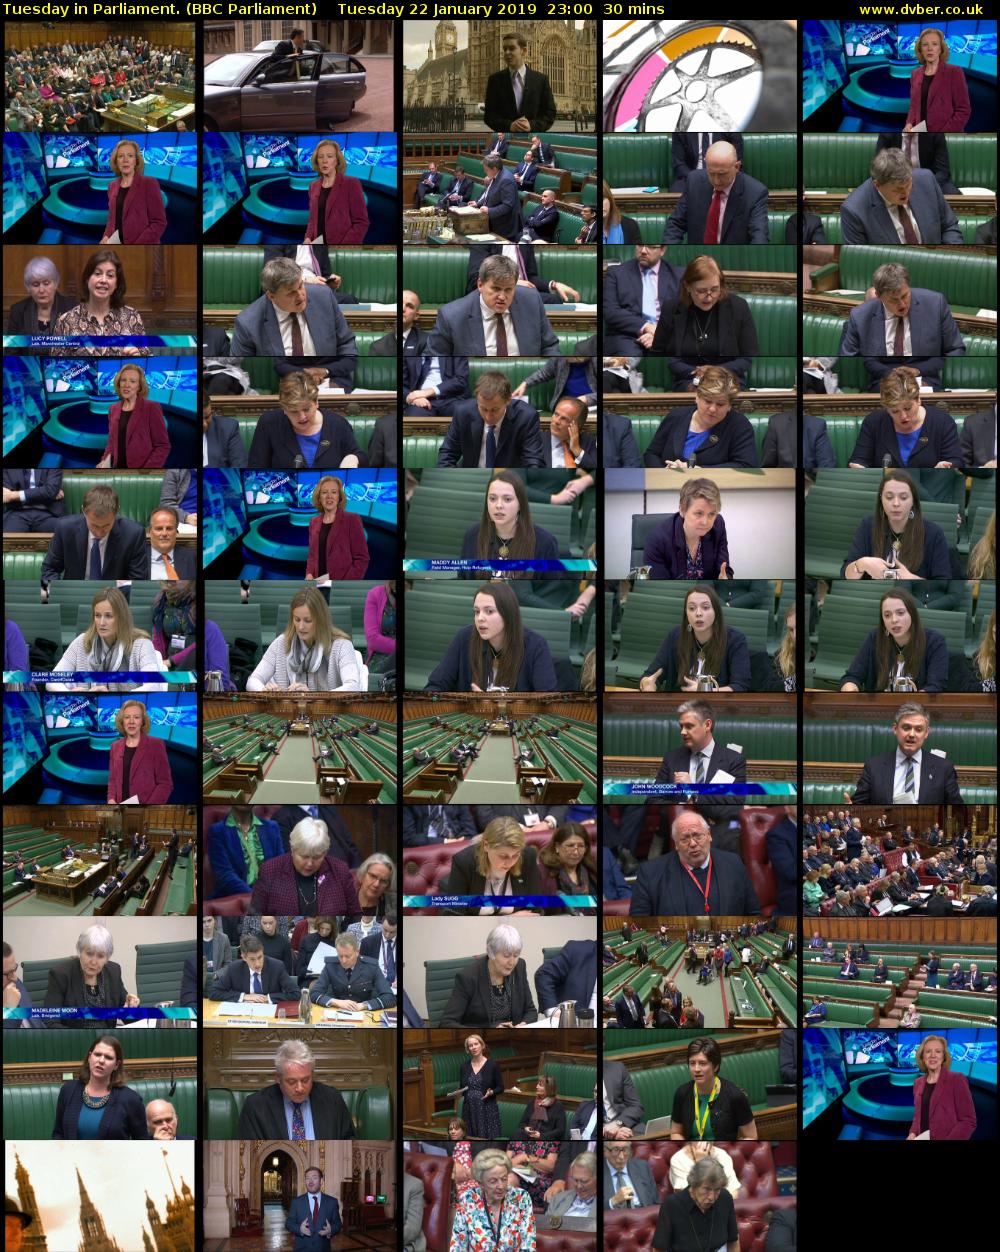 Tuesday in Parliament. (BBC Parliament) Tuesday 22 January 2019 23:00 - 23:30